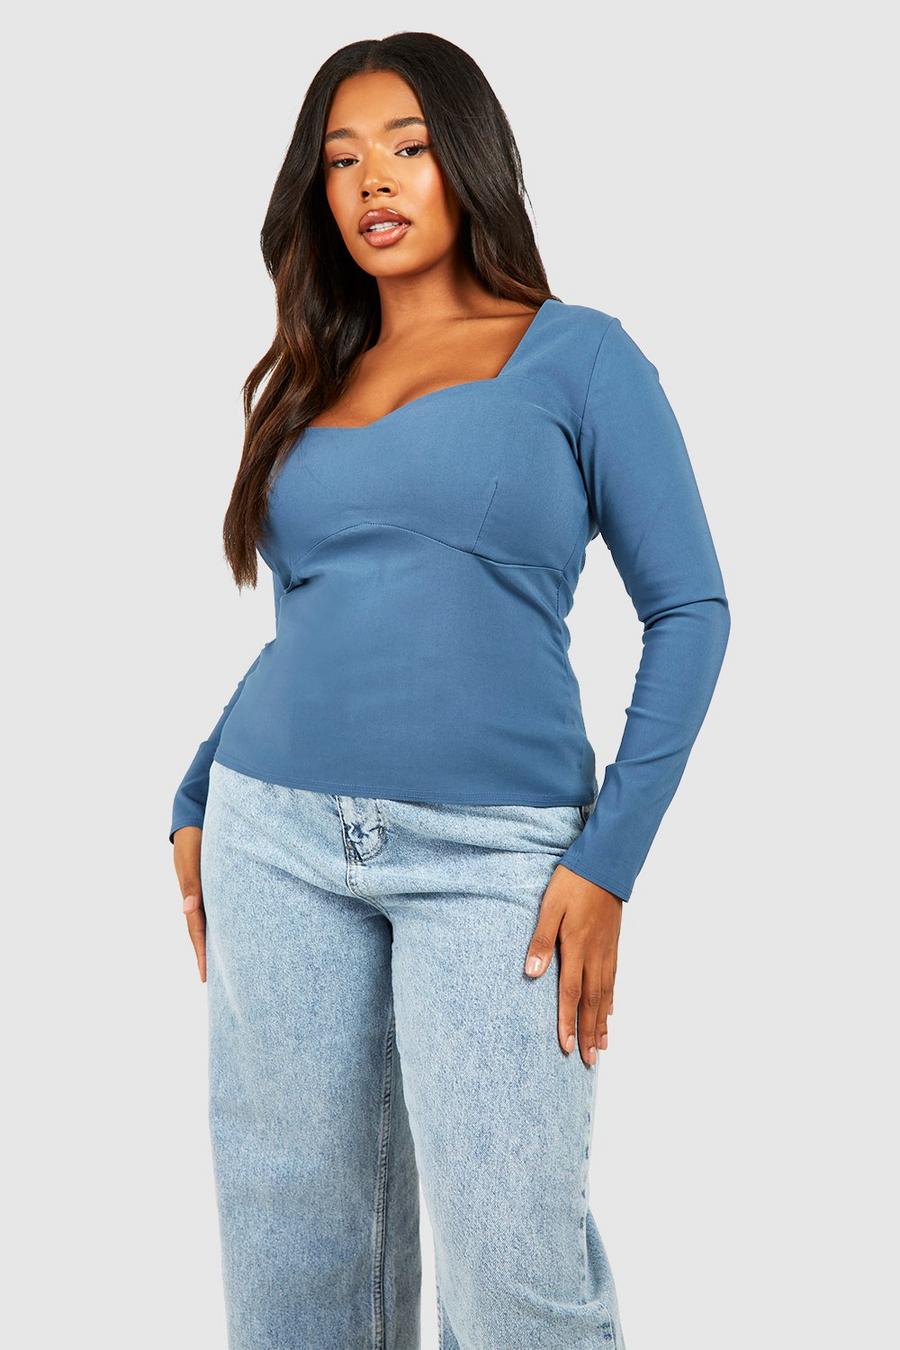 Plus Size Tops, Plus Size Going Out Tops